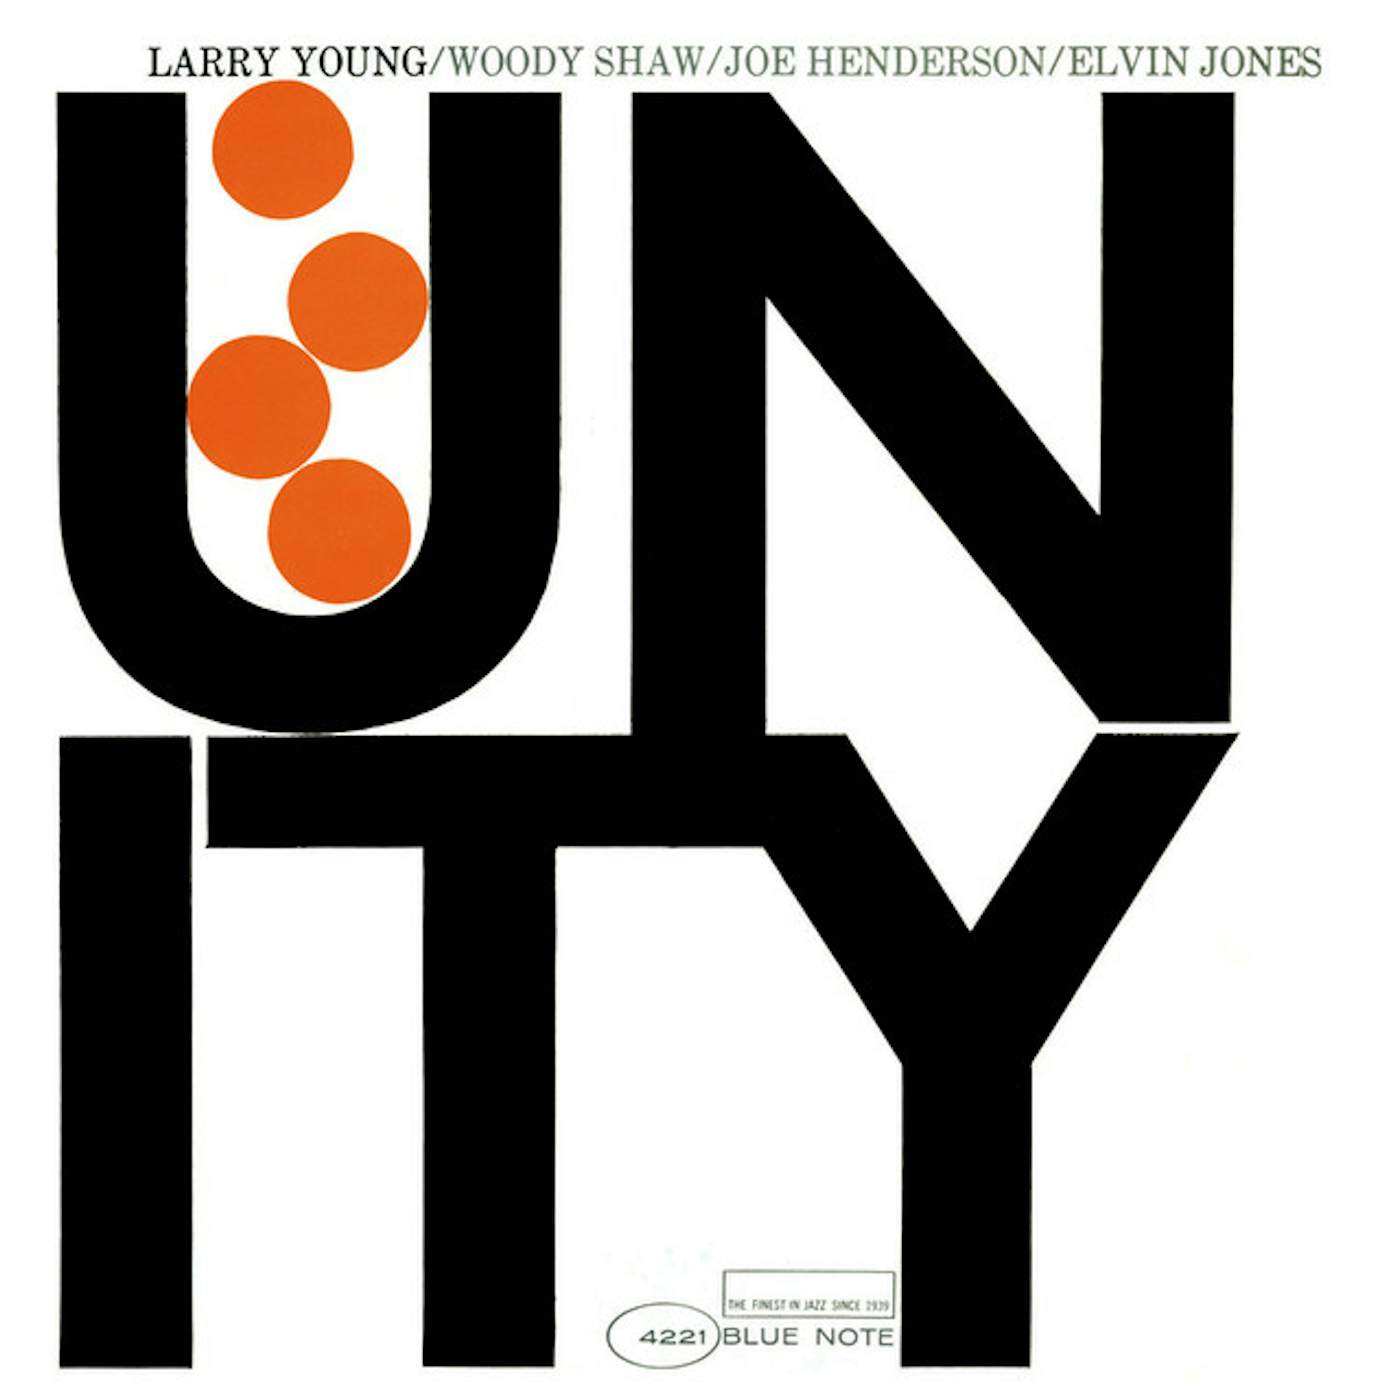 Larry Young UNITY Vinyl Record - Gatefold Sleeve, Limited Edition, 180 Gram Pressing, Remastered